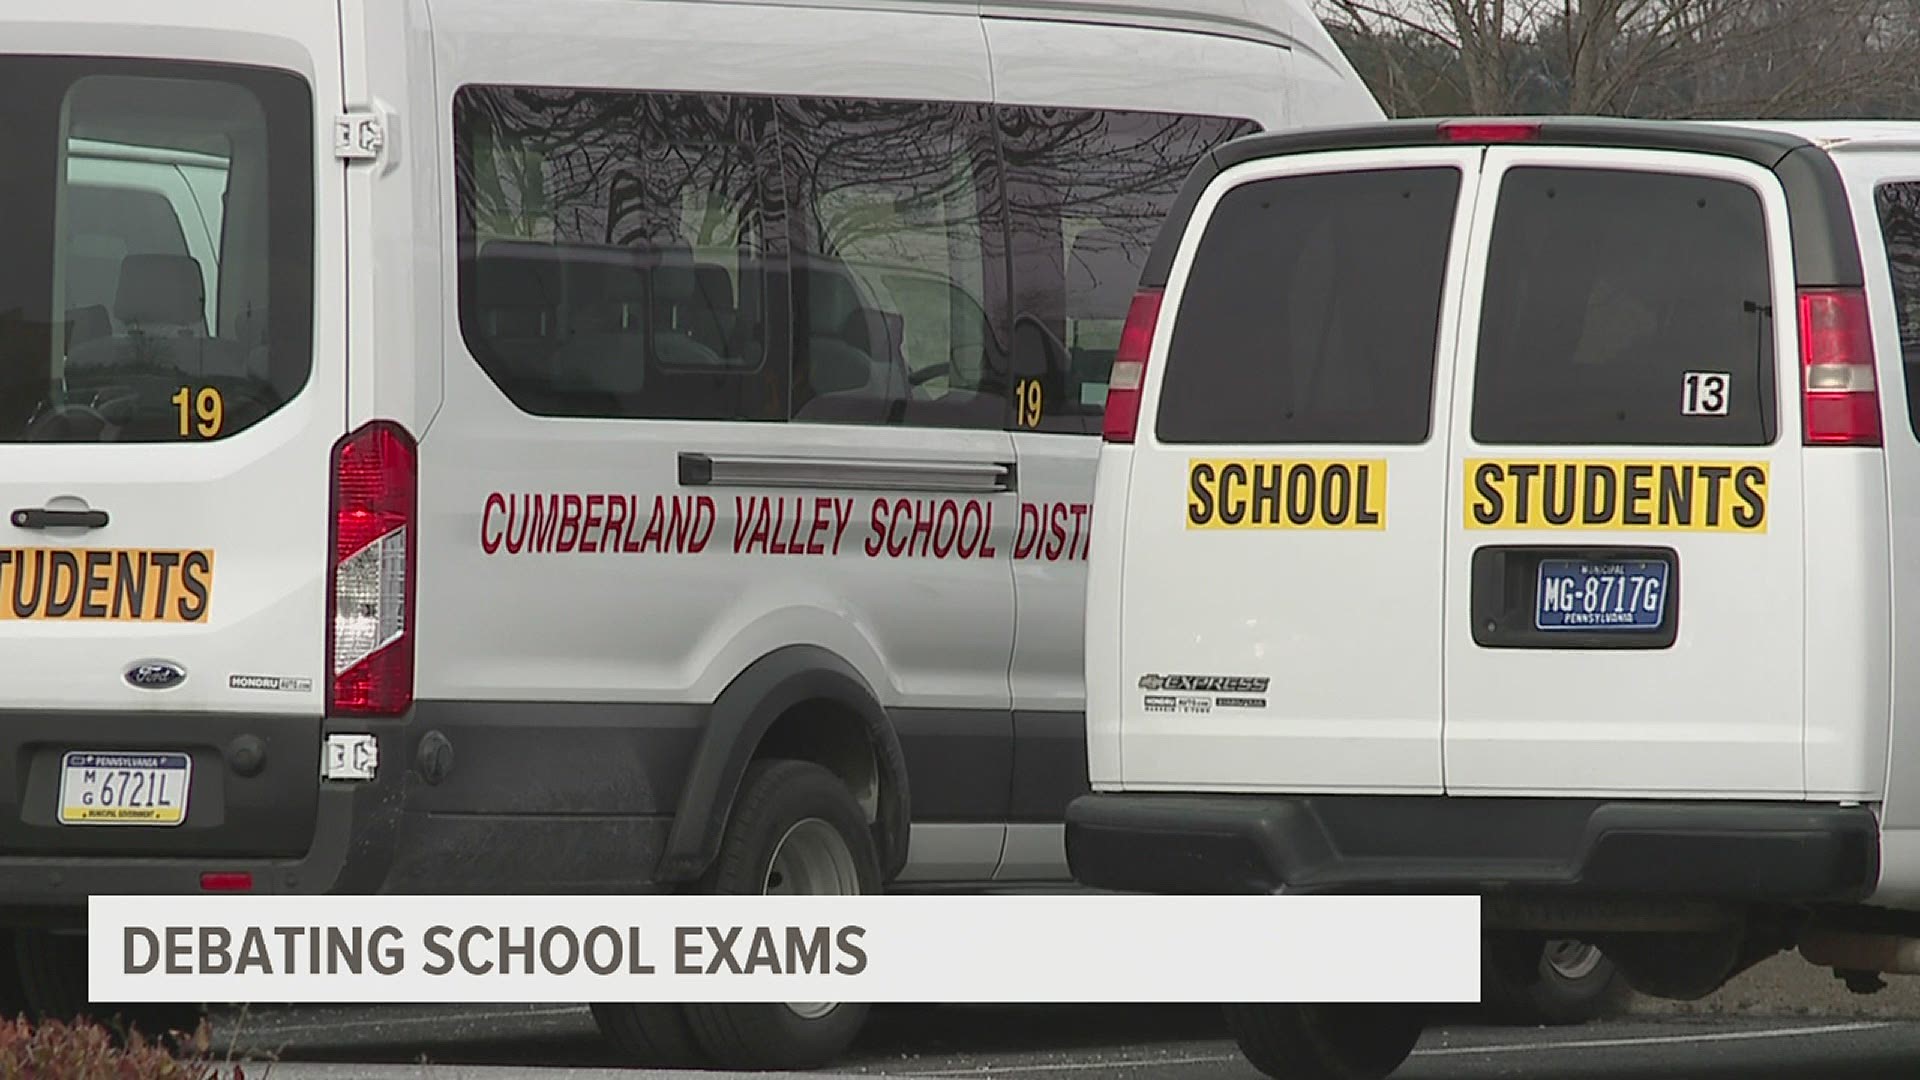 The annual statewide exams that are normally given in person are posing a big challenge to school districts during the COVID-19 pandemic.